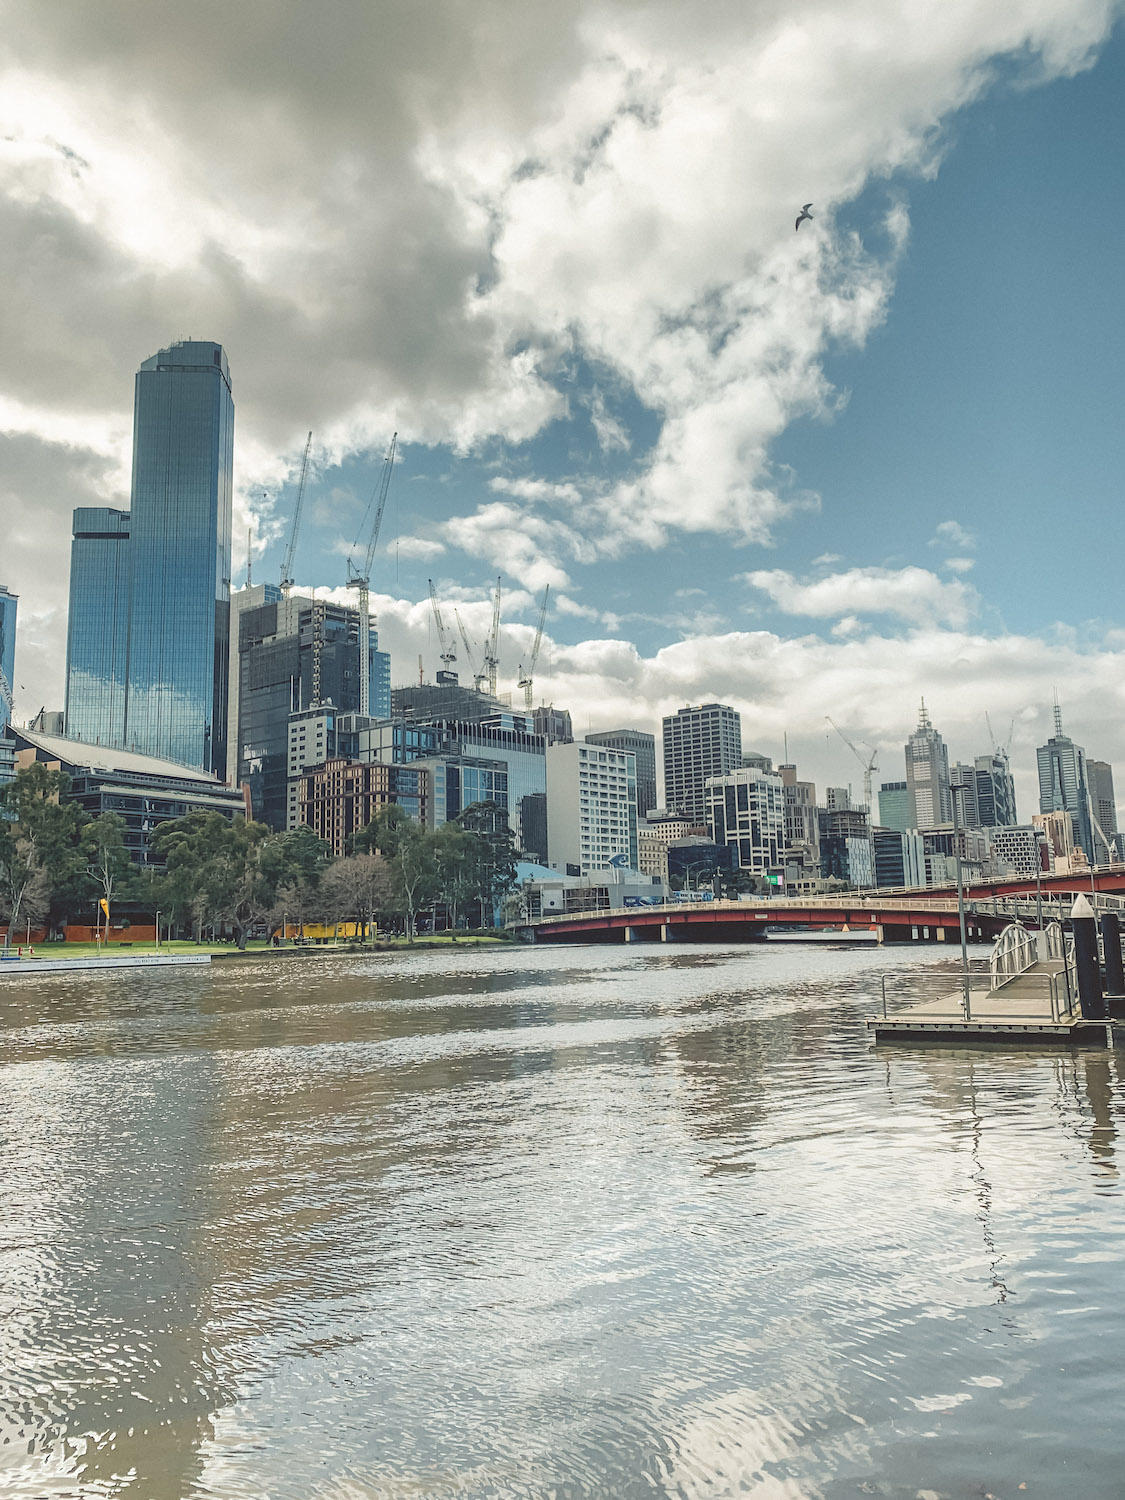 The Yarra river running through the Melbourne CBO. On the other side of the river are tall office buildings.